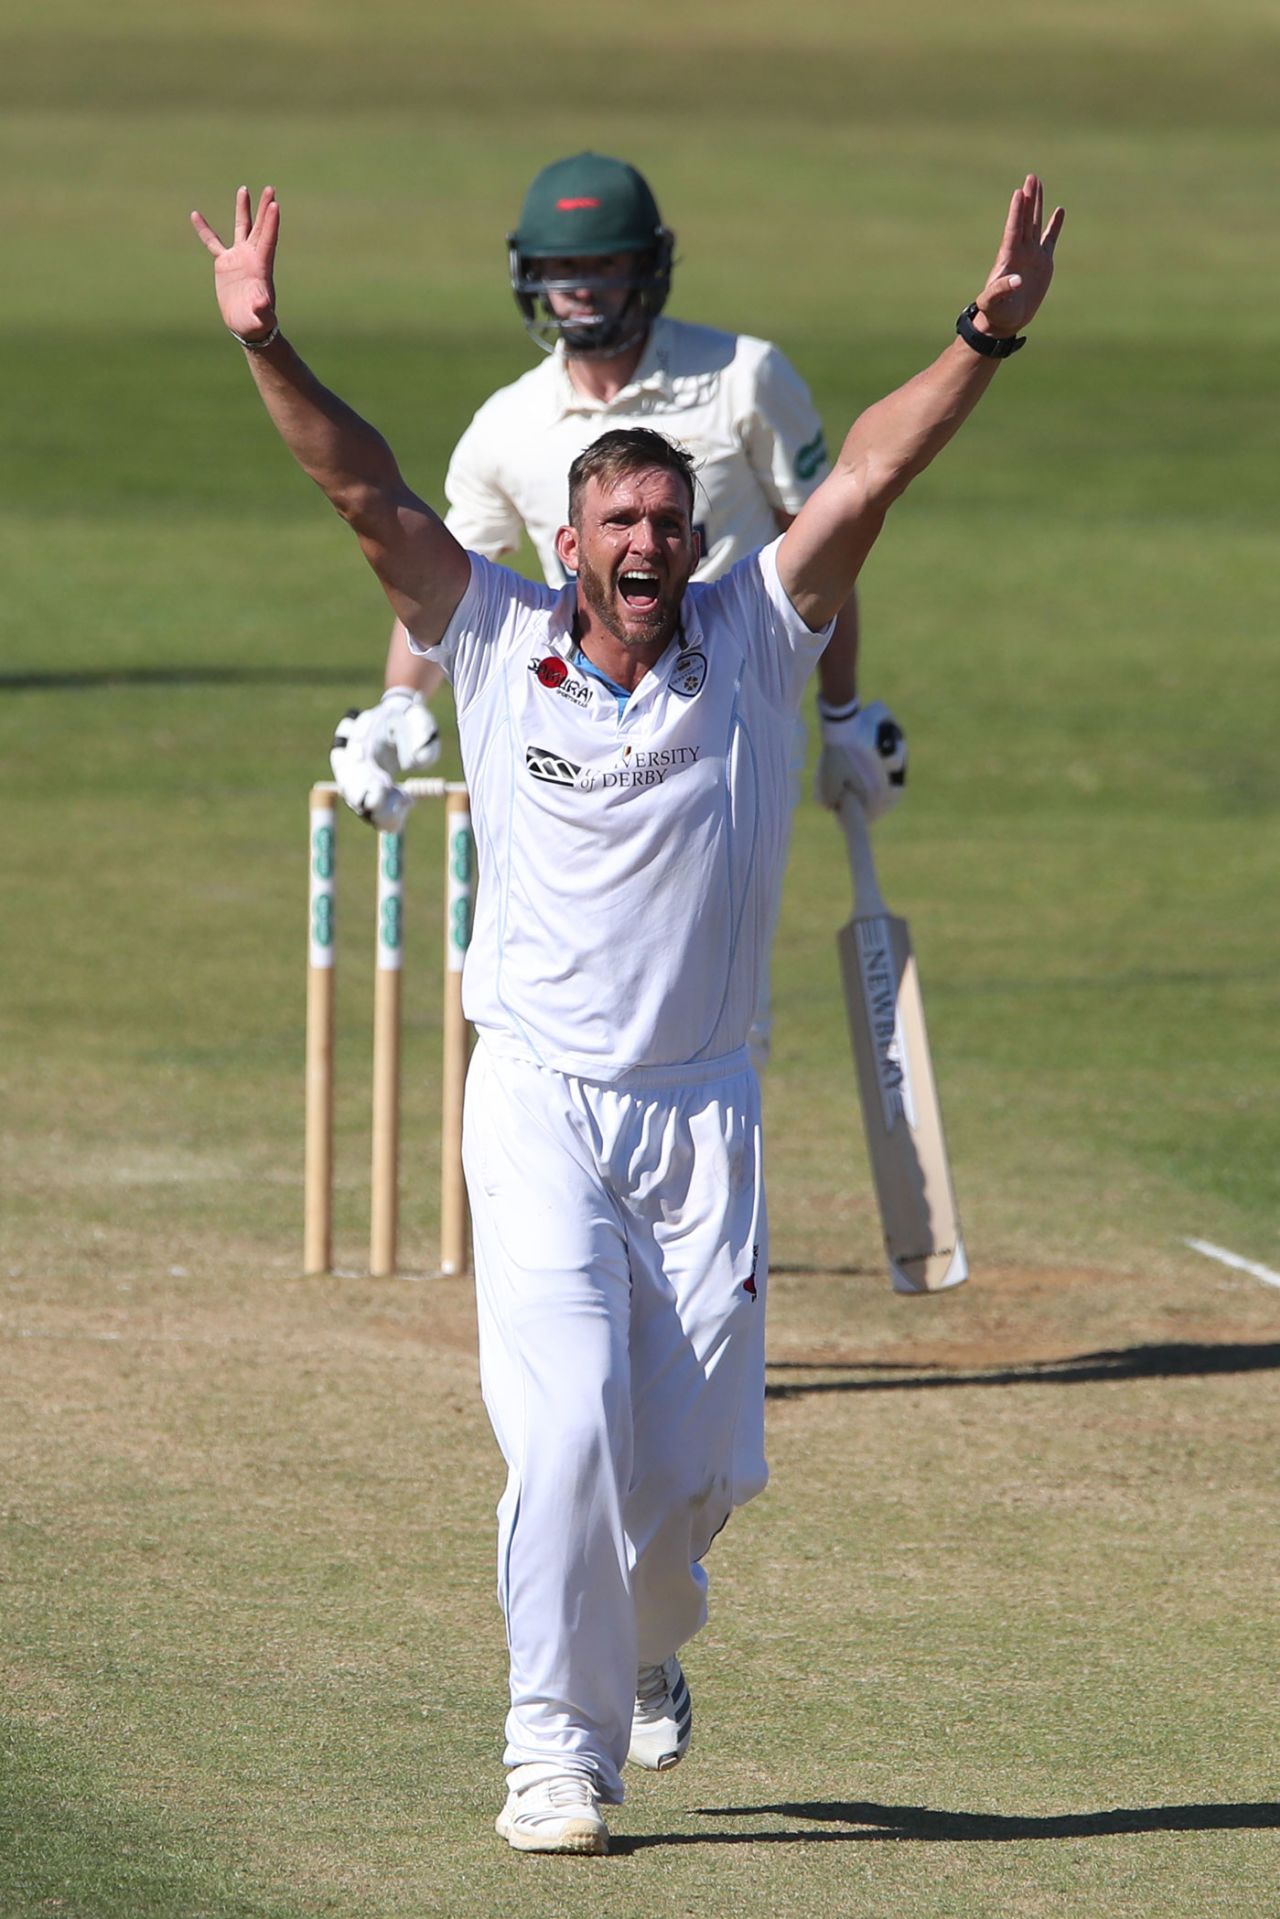 Hardus Viljoen goes up in appeal, Derbyshire v Leicestershire, County Championship, Division Two, Derby, 2nd day, June 26, 2018